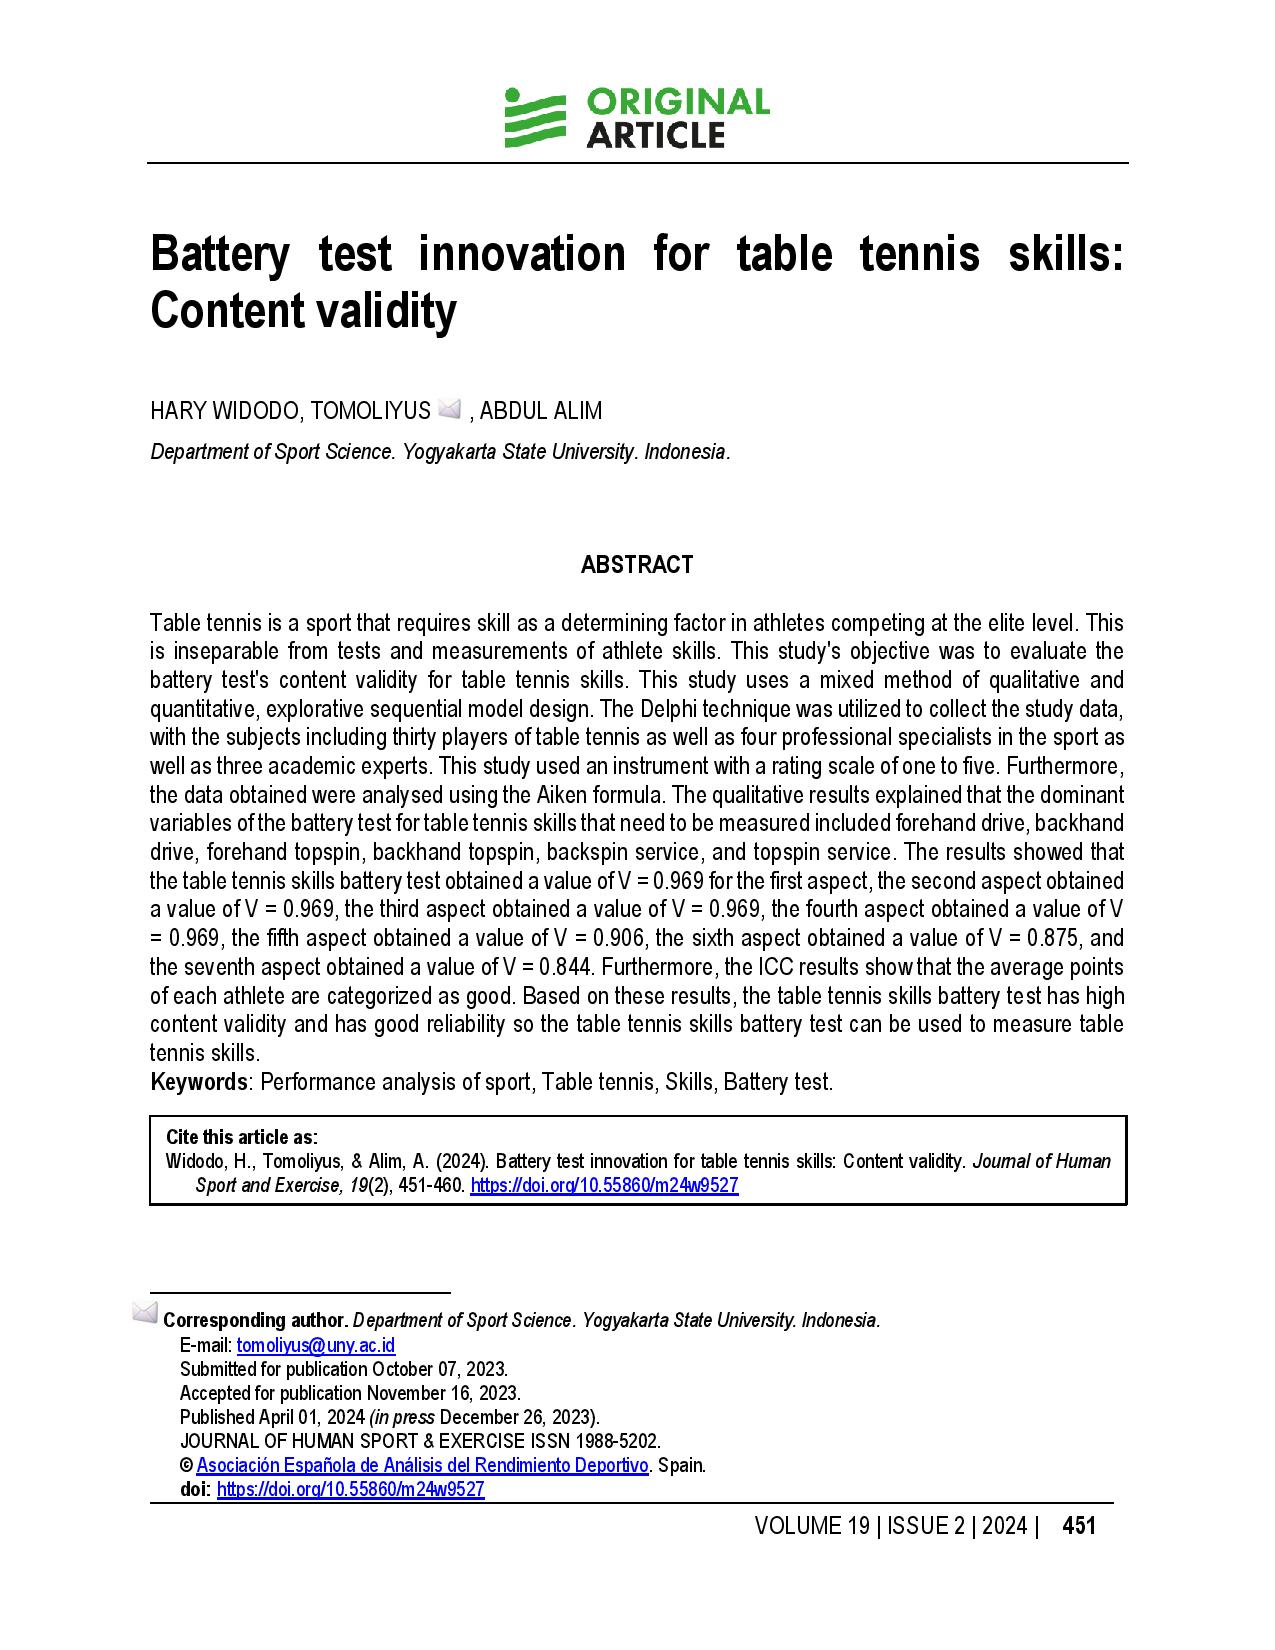 Battery test innovation for table tennis skills: Content validity